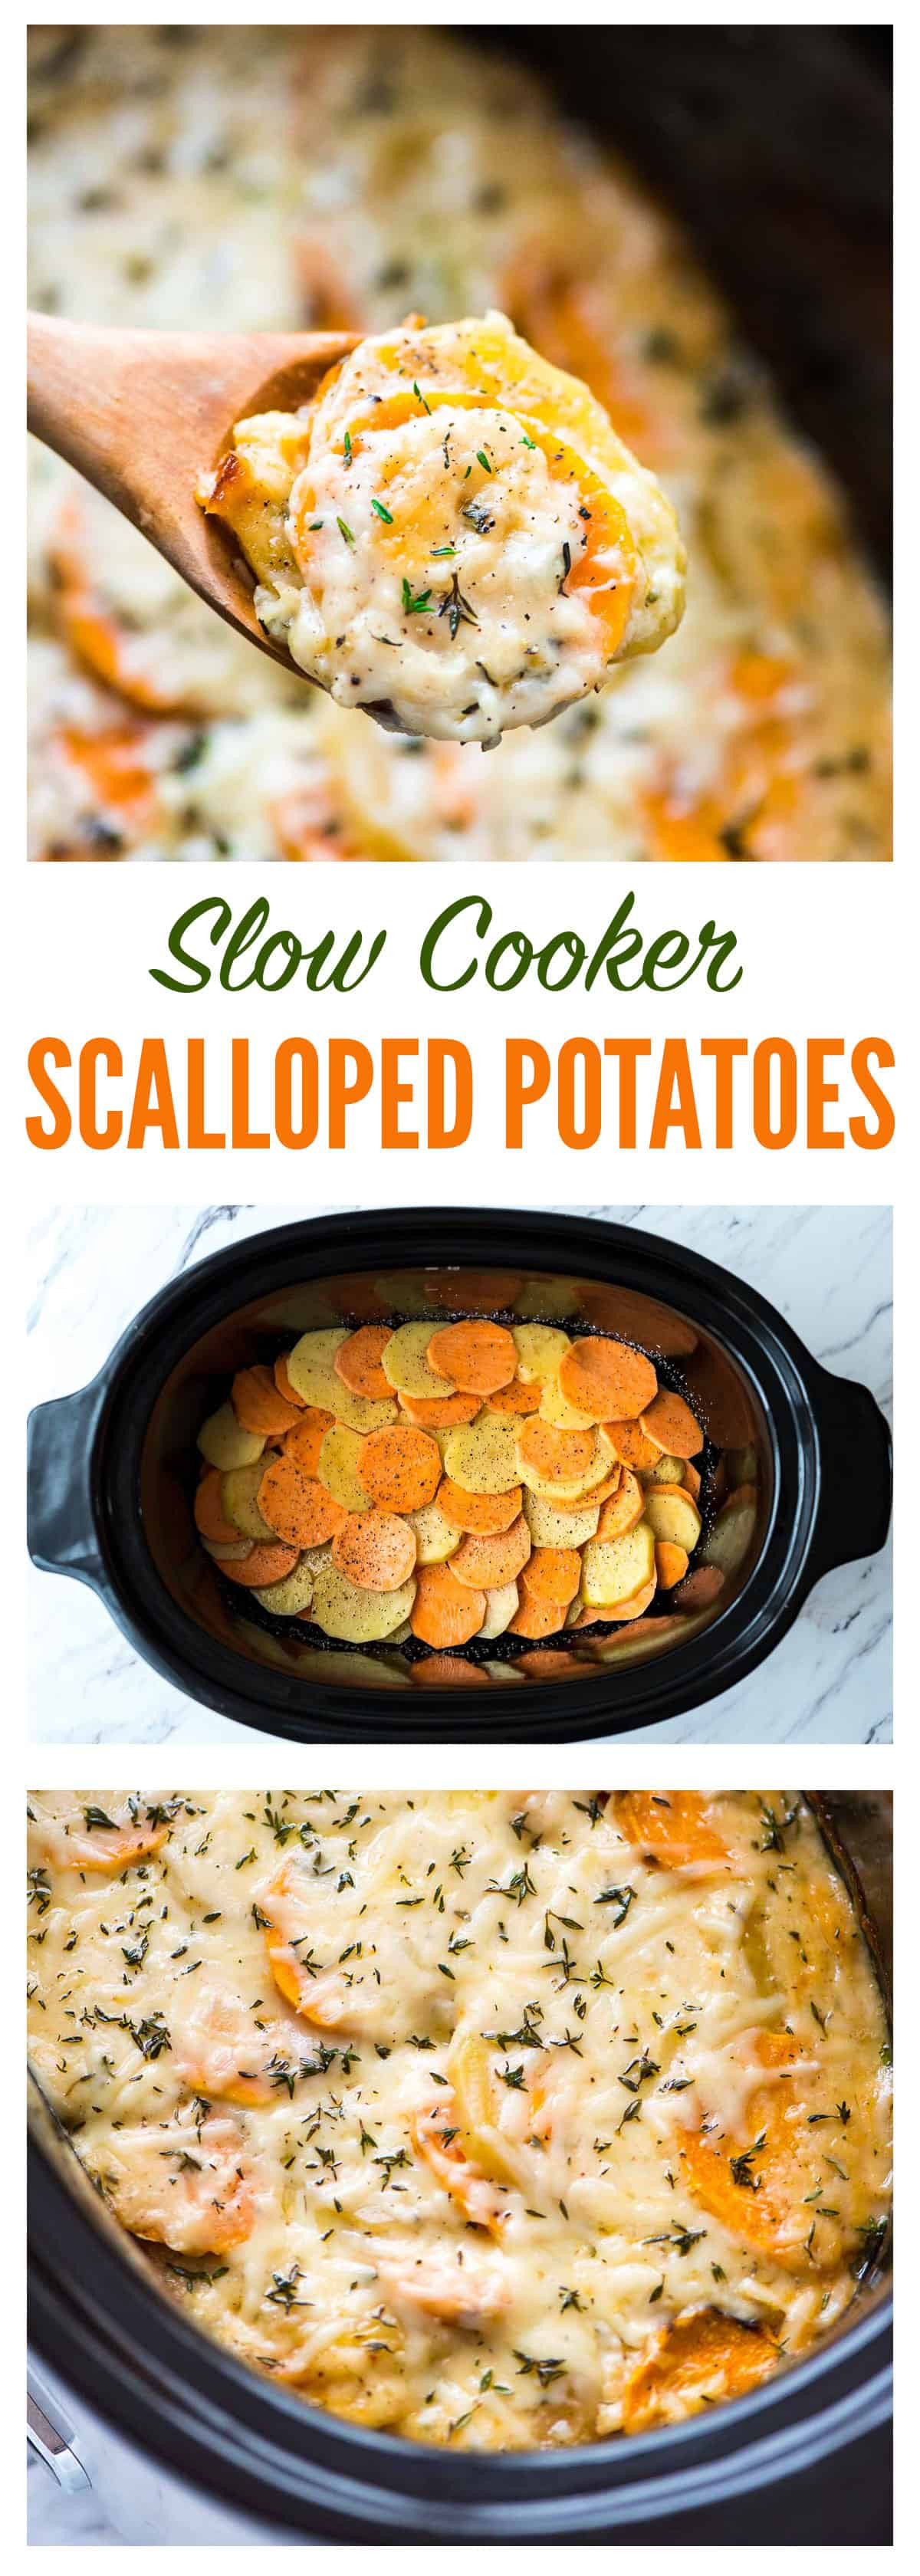 Healthy Slow Cooker Scalloped Potatoes
 Slow Cooker Scalloped Potatoes Recipe